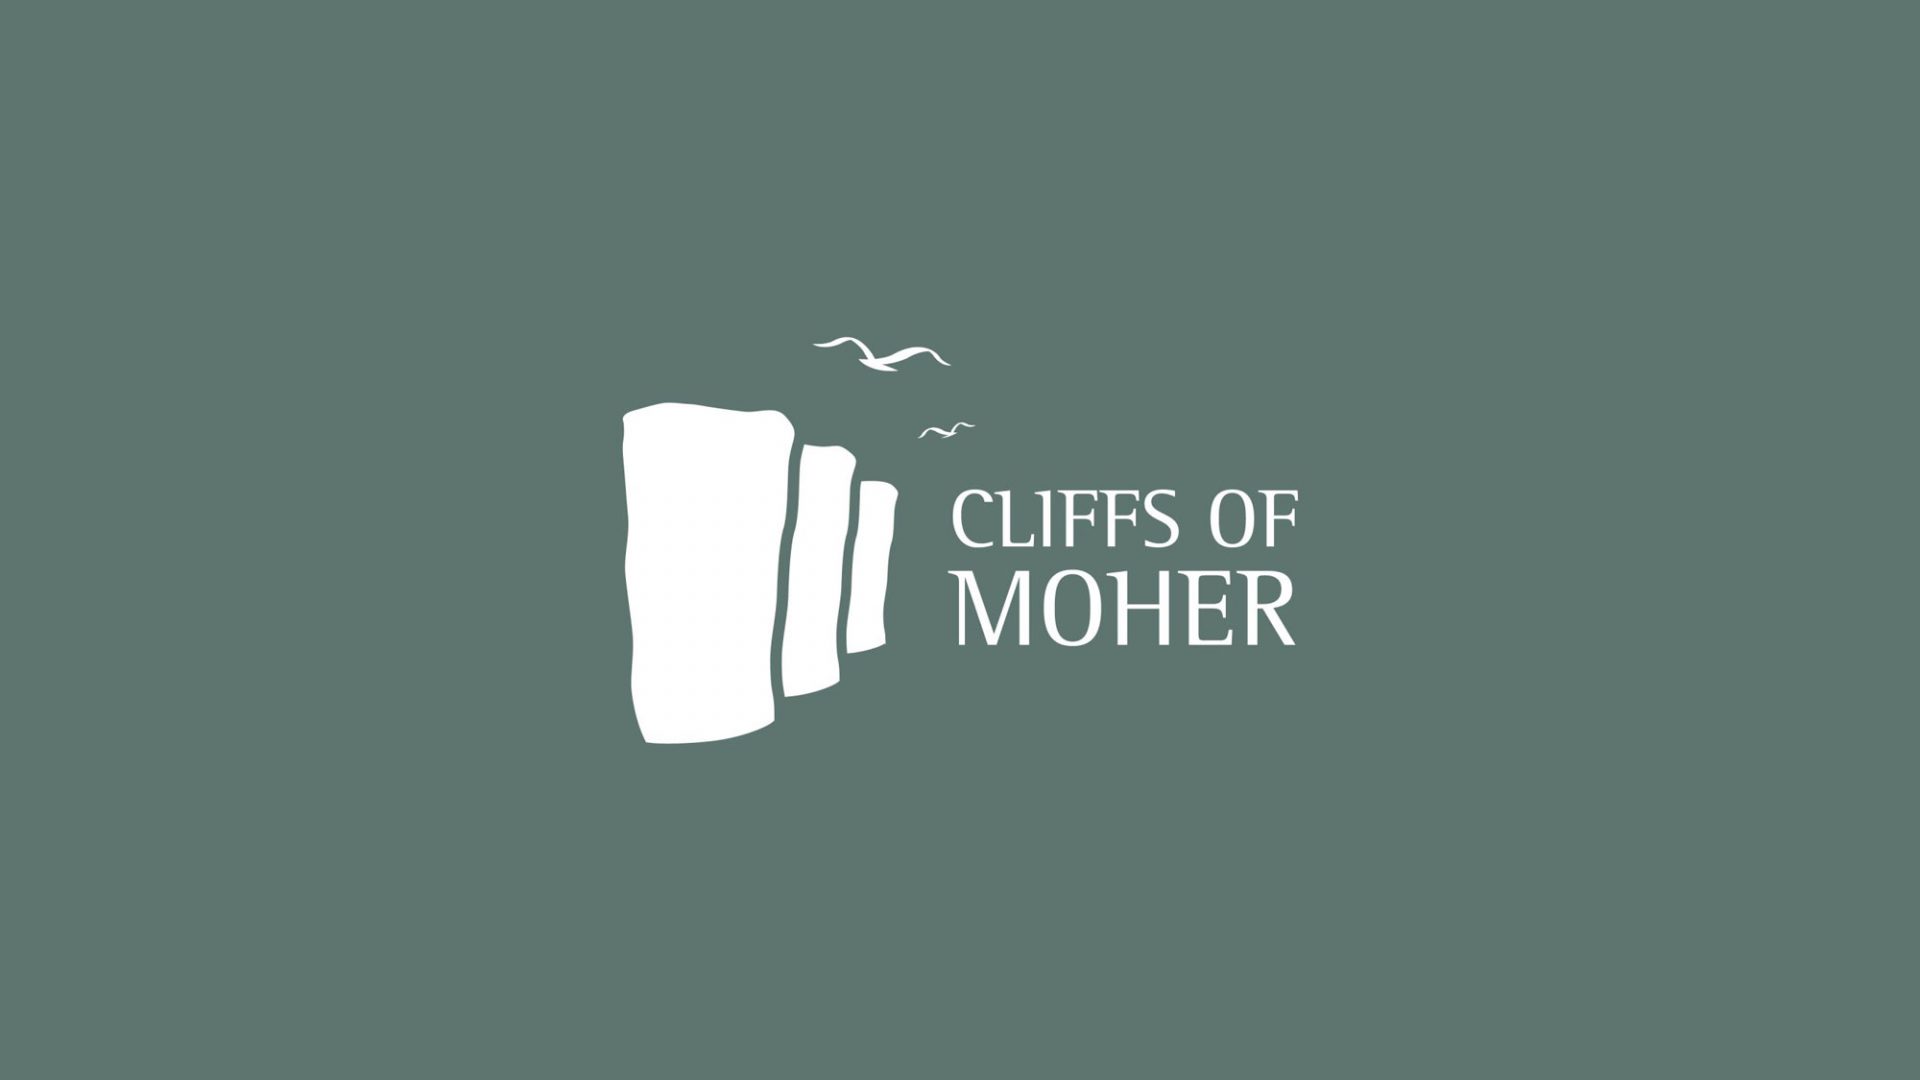 Logo redesign for historic Cliffs of Moher in Ireland